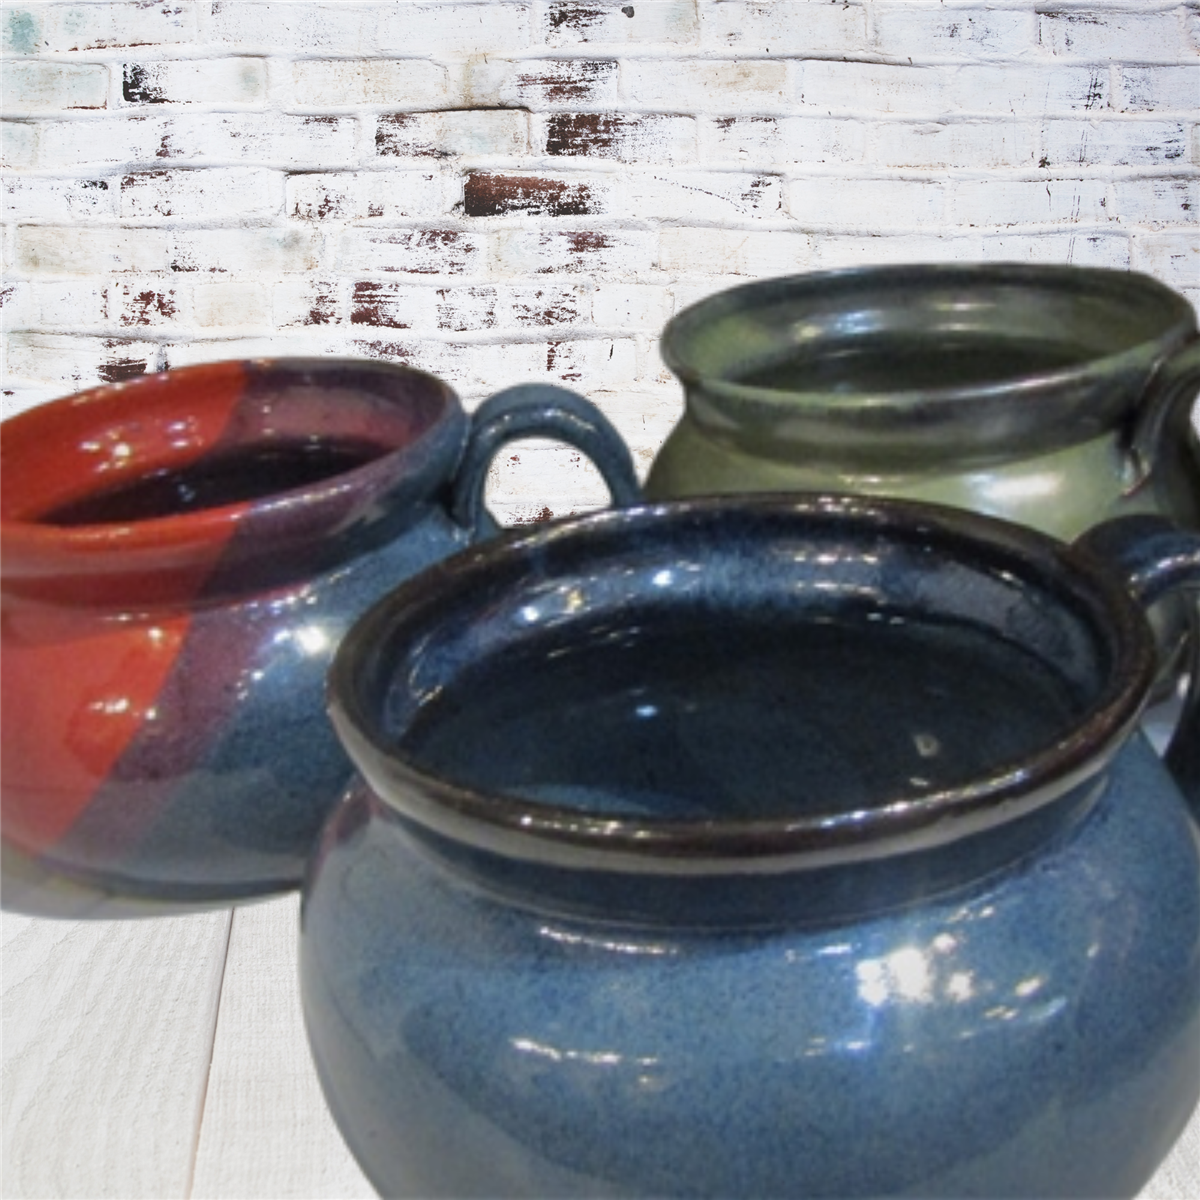 Chili bowl for soup, French onion soup, pottery bowl with handle